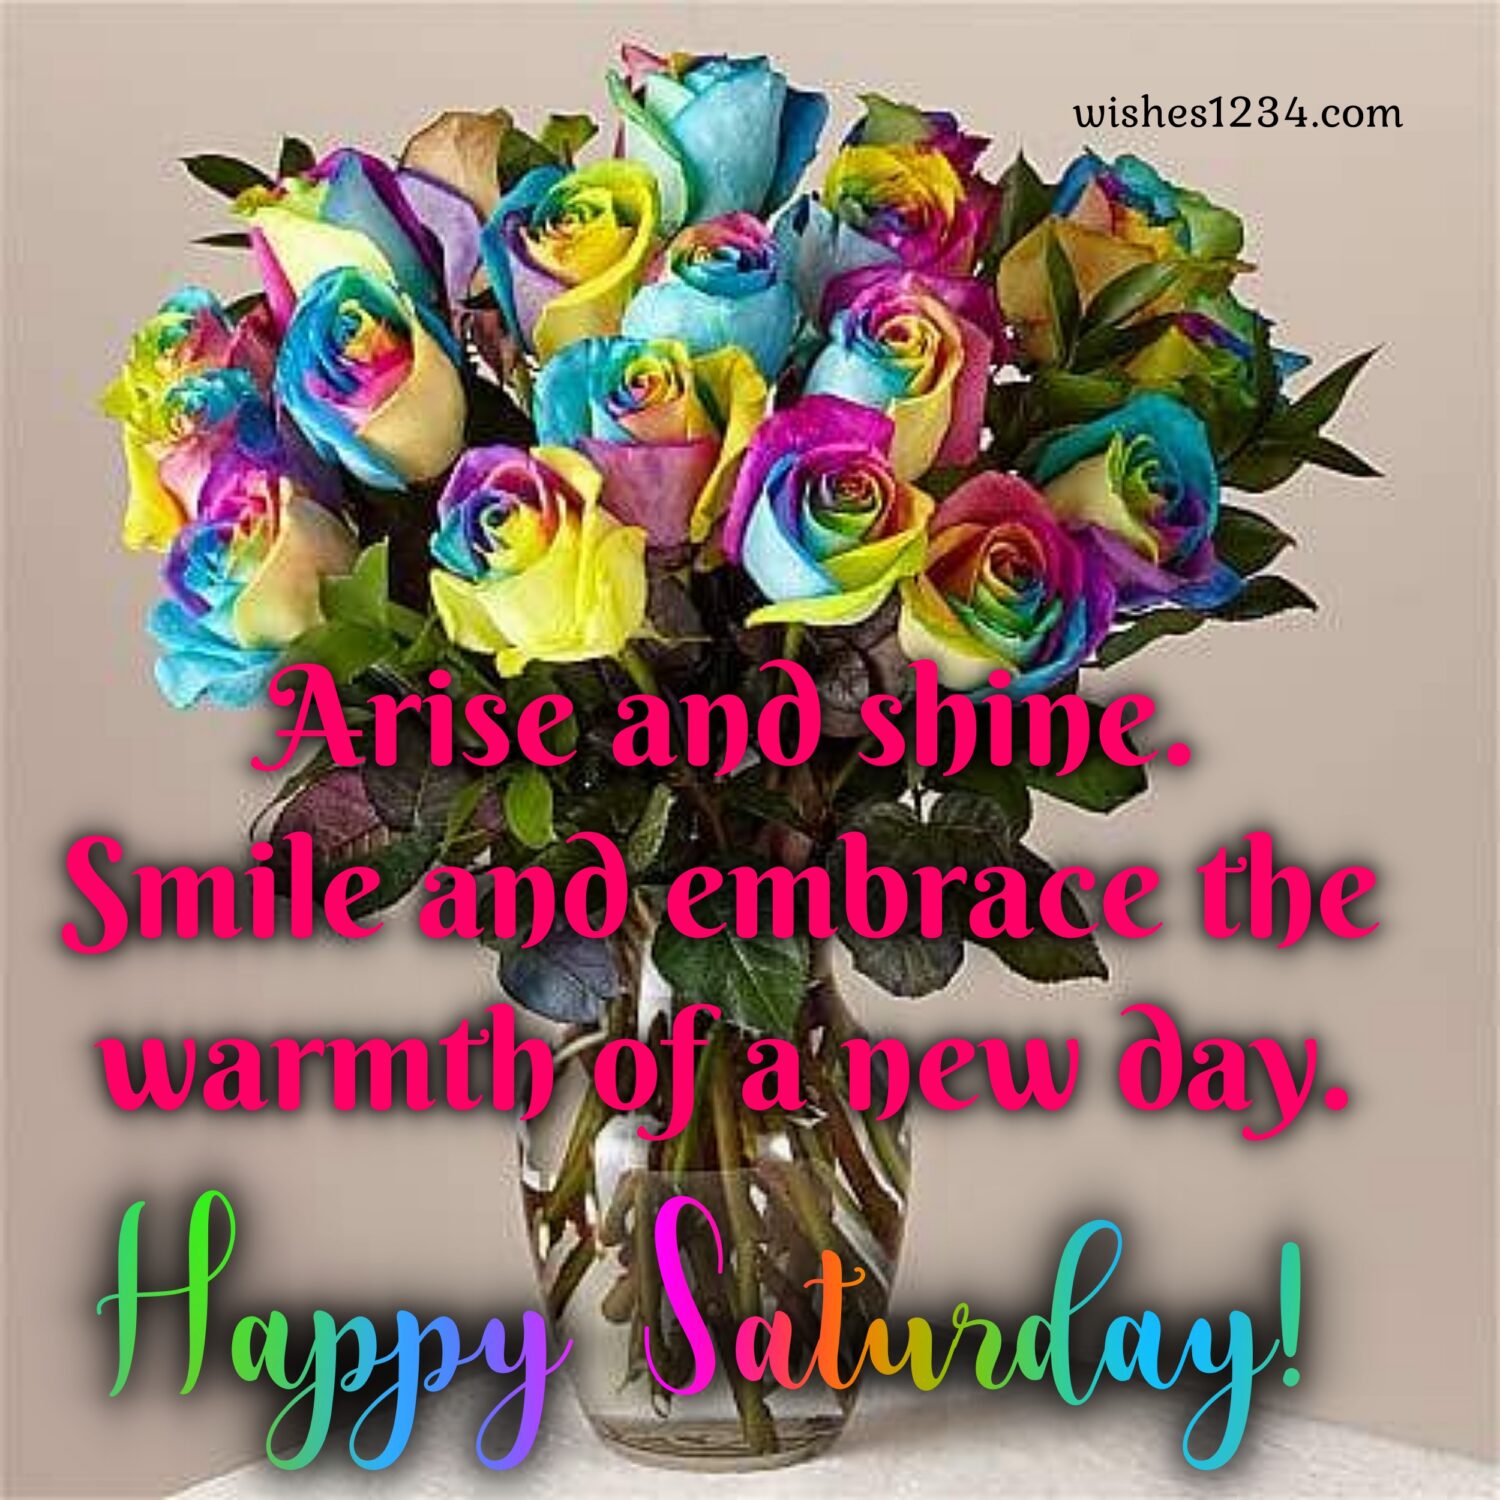 Saturday quotes with rainbow roses bouquet, Good Morning Saturday Images.